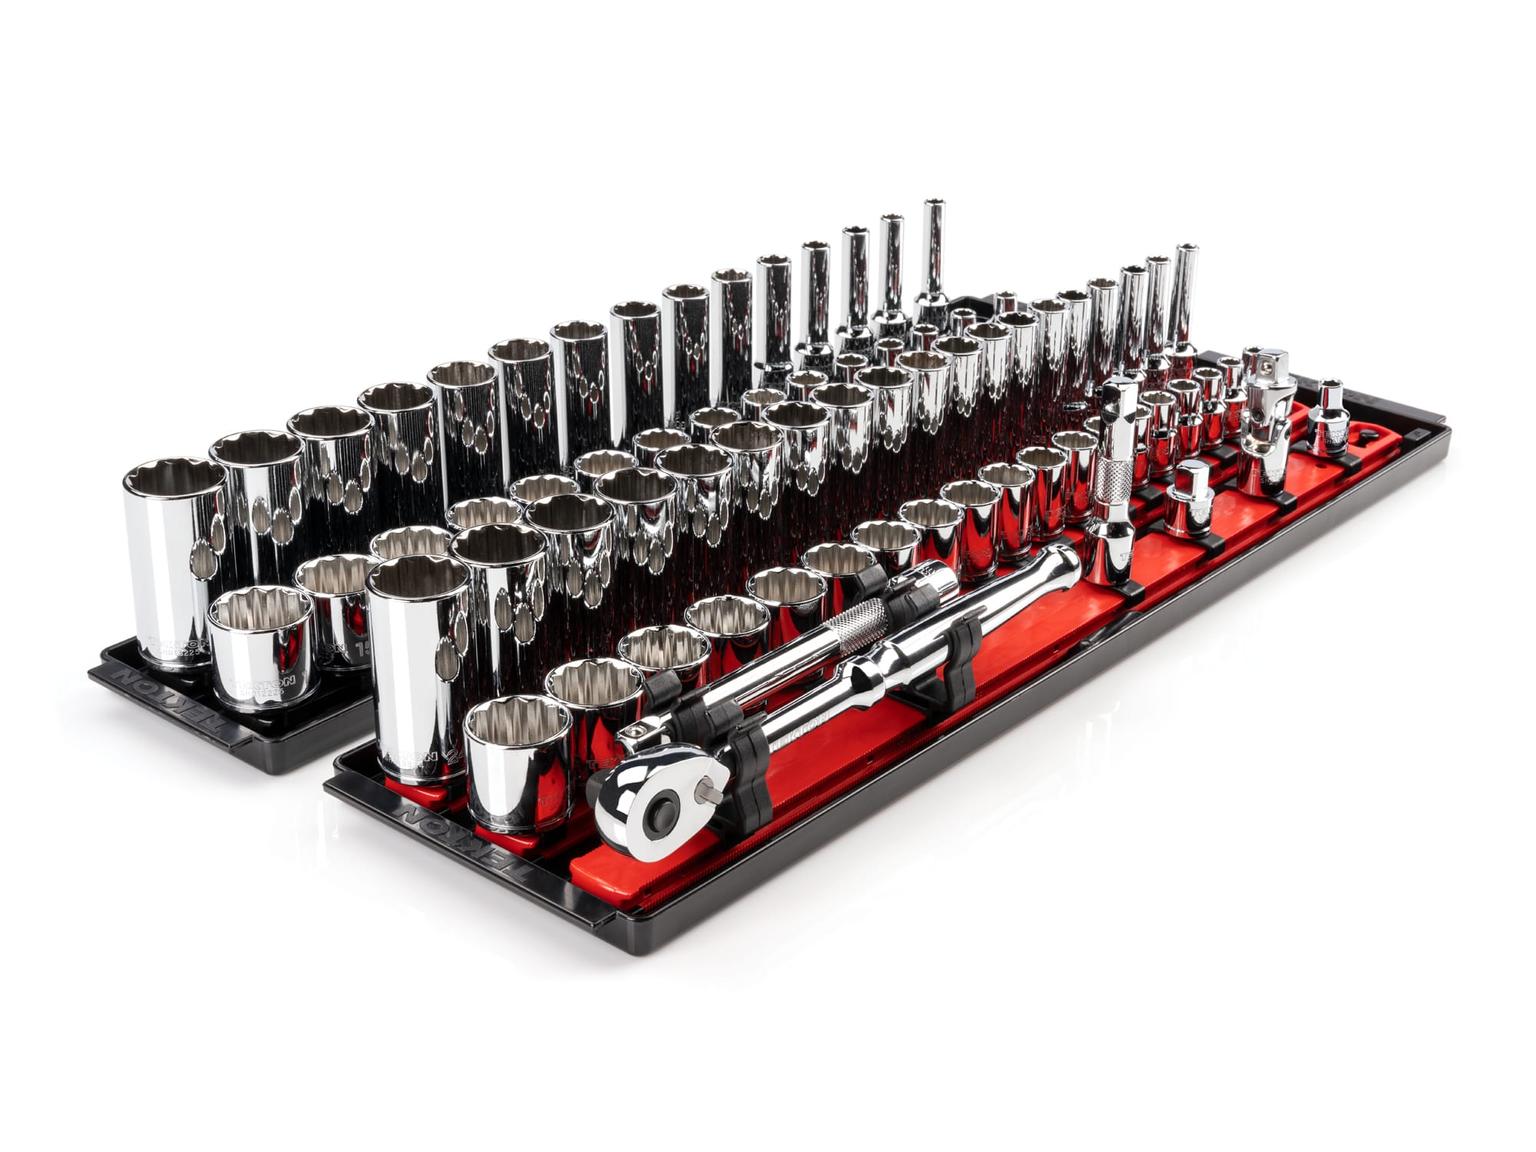 TEKTON SKT13302-T 3/8 Inch Drive 12-Point Socket and Ratchet Set with Rails, 74-Piece (1/4-1 in., 6-24 mm)